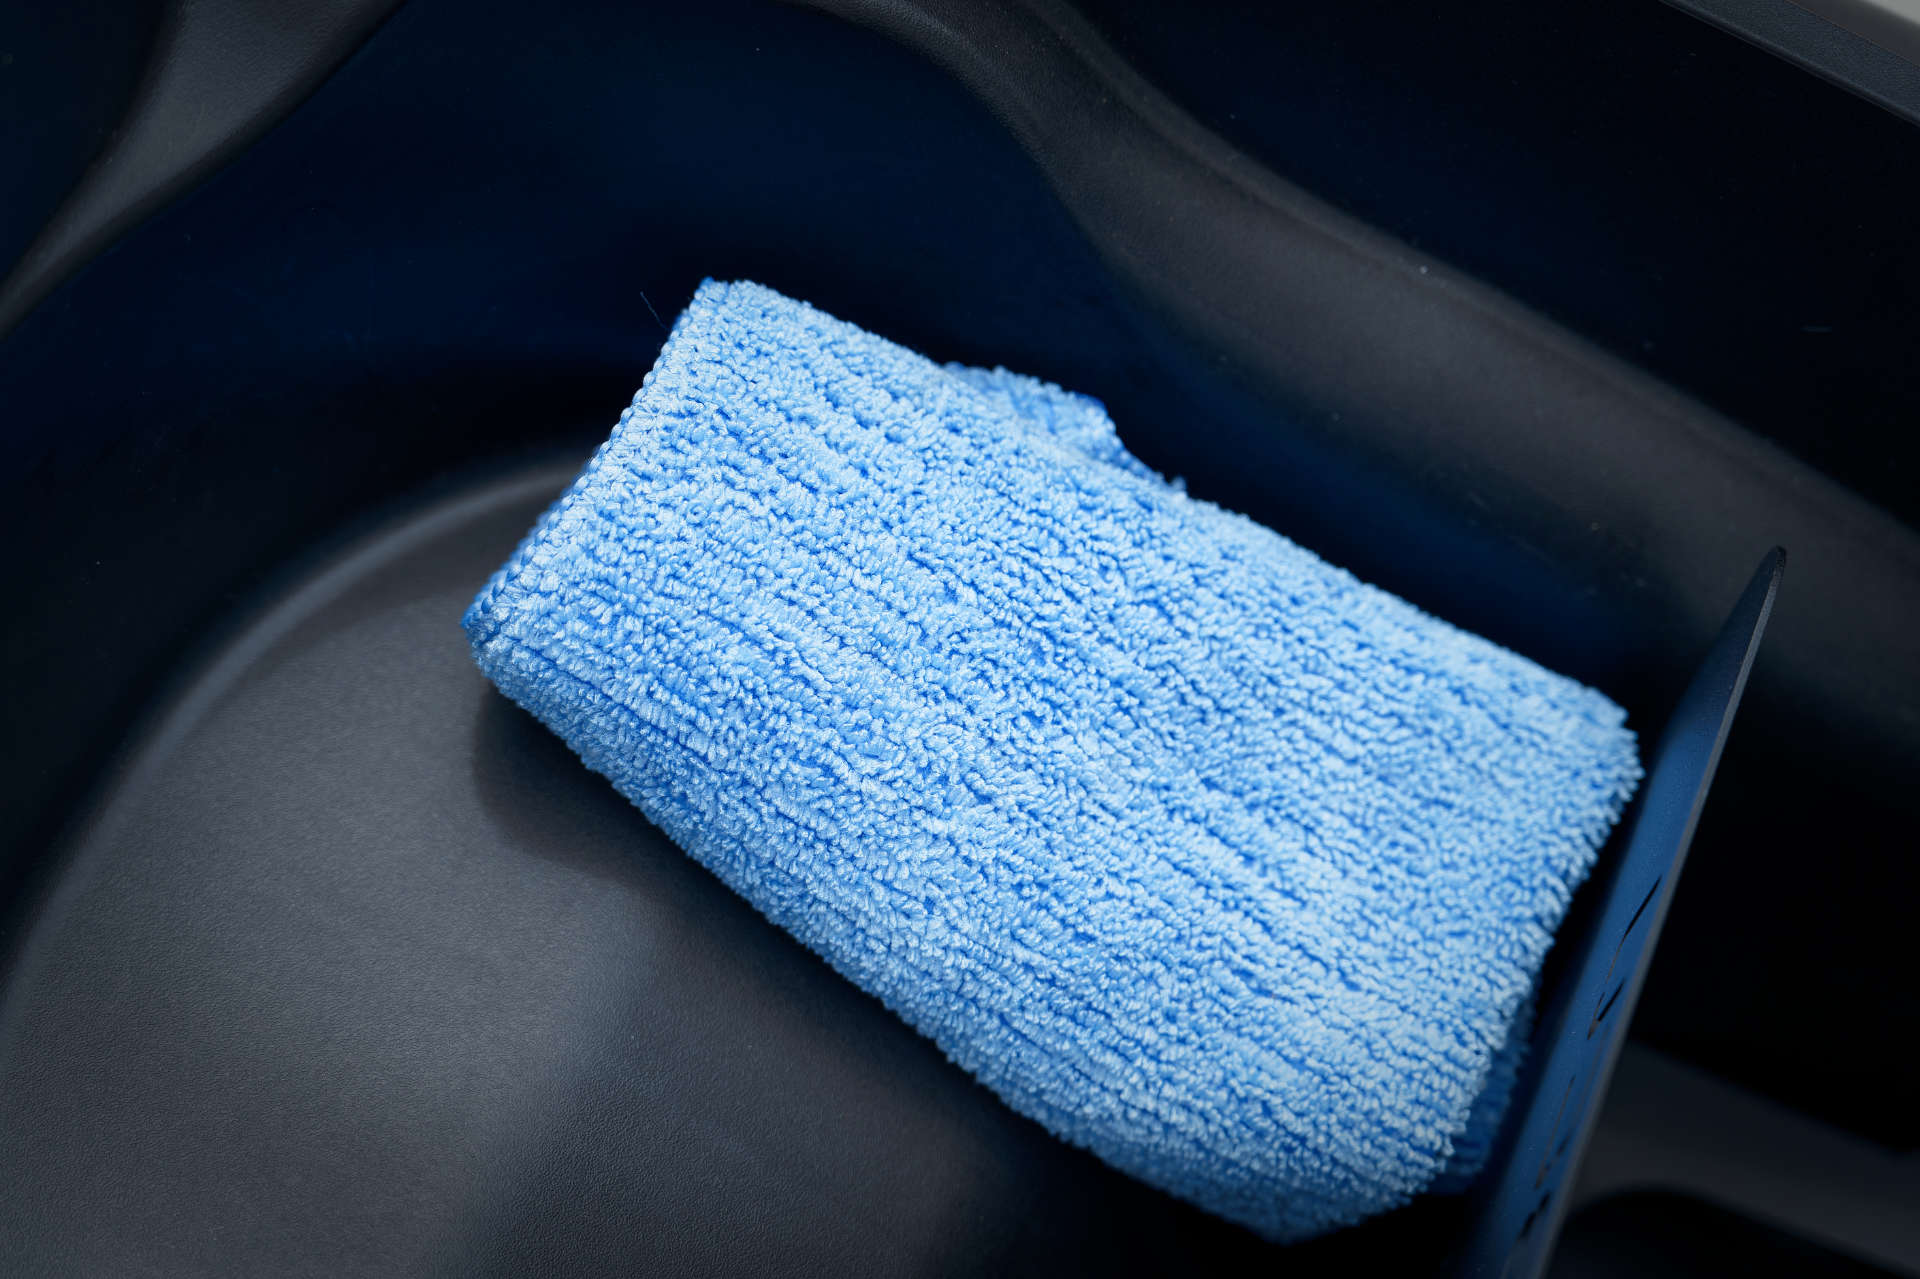 Blue cleaning cloth in an under-seat scooter storage area.